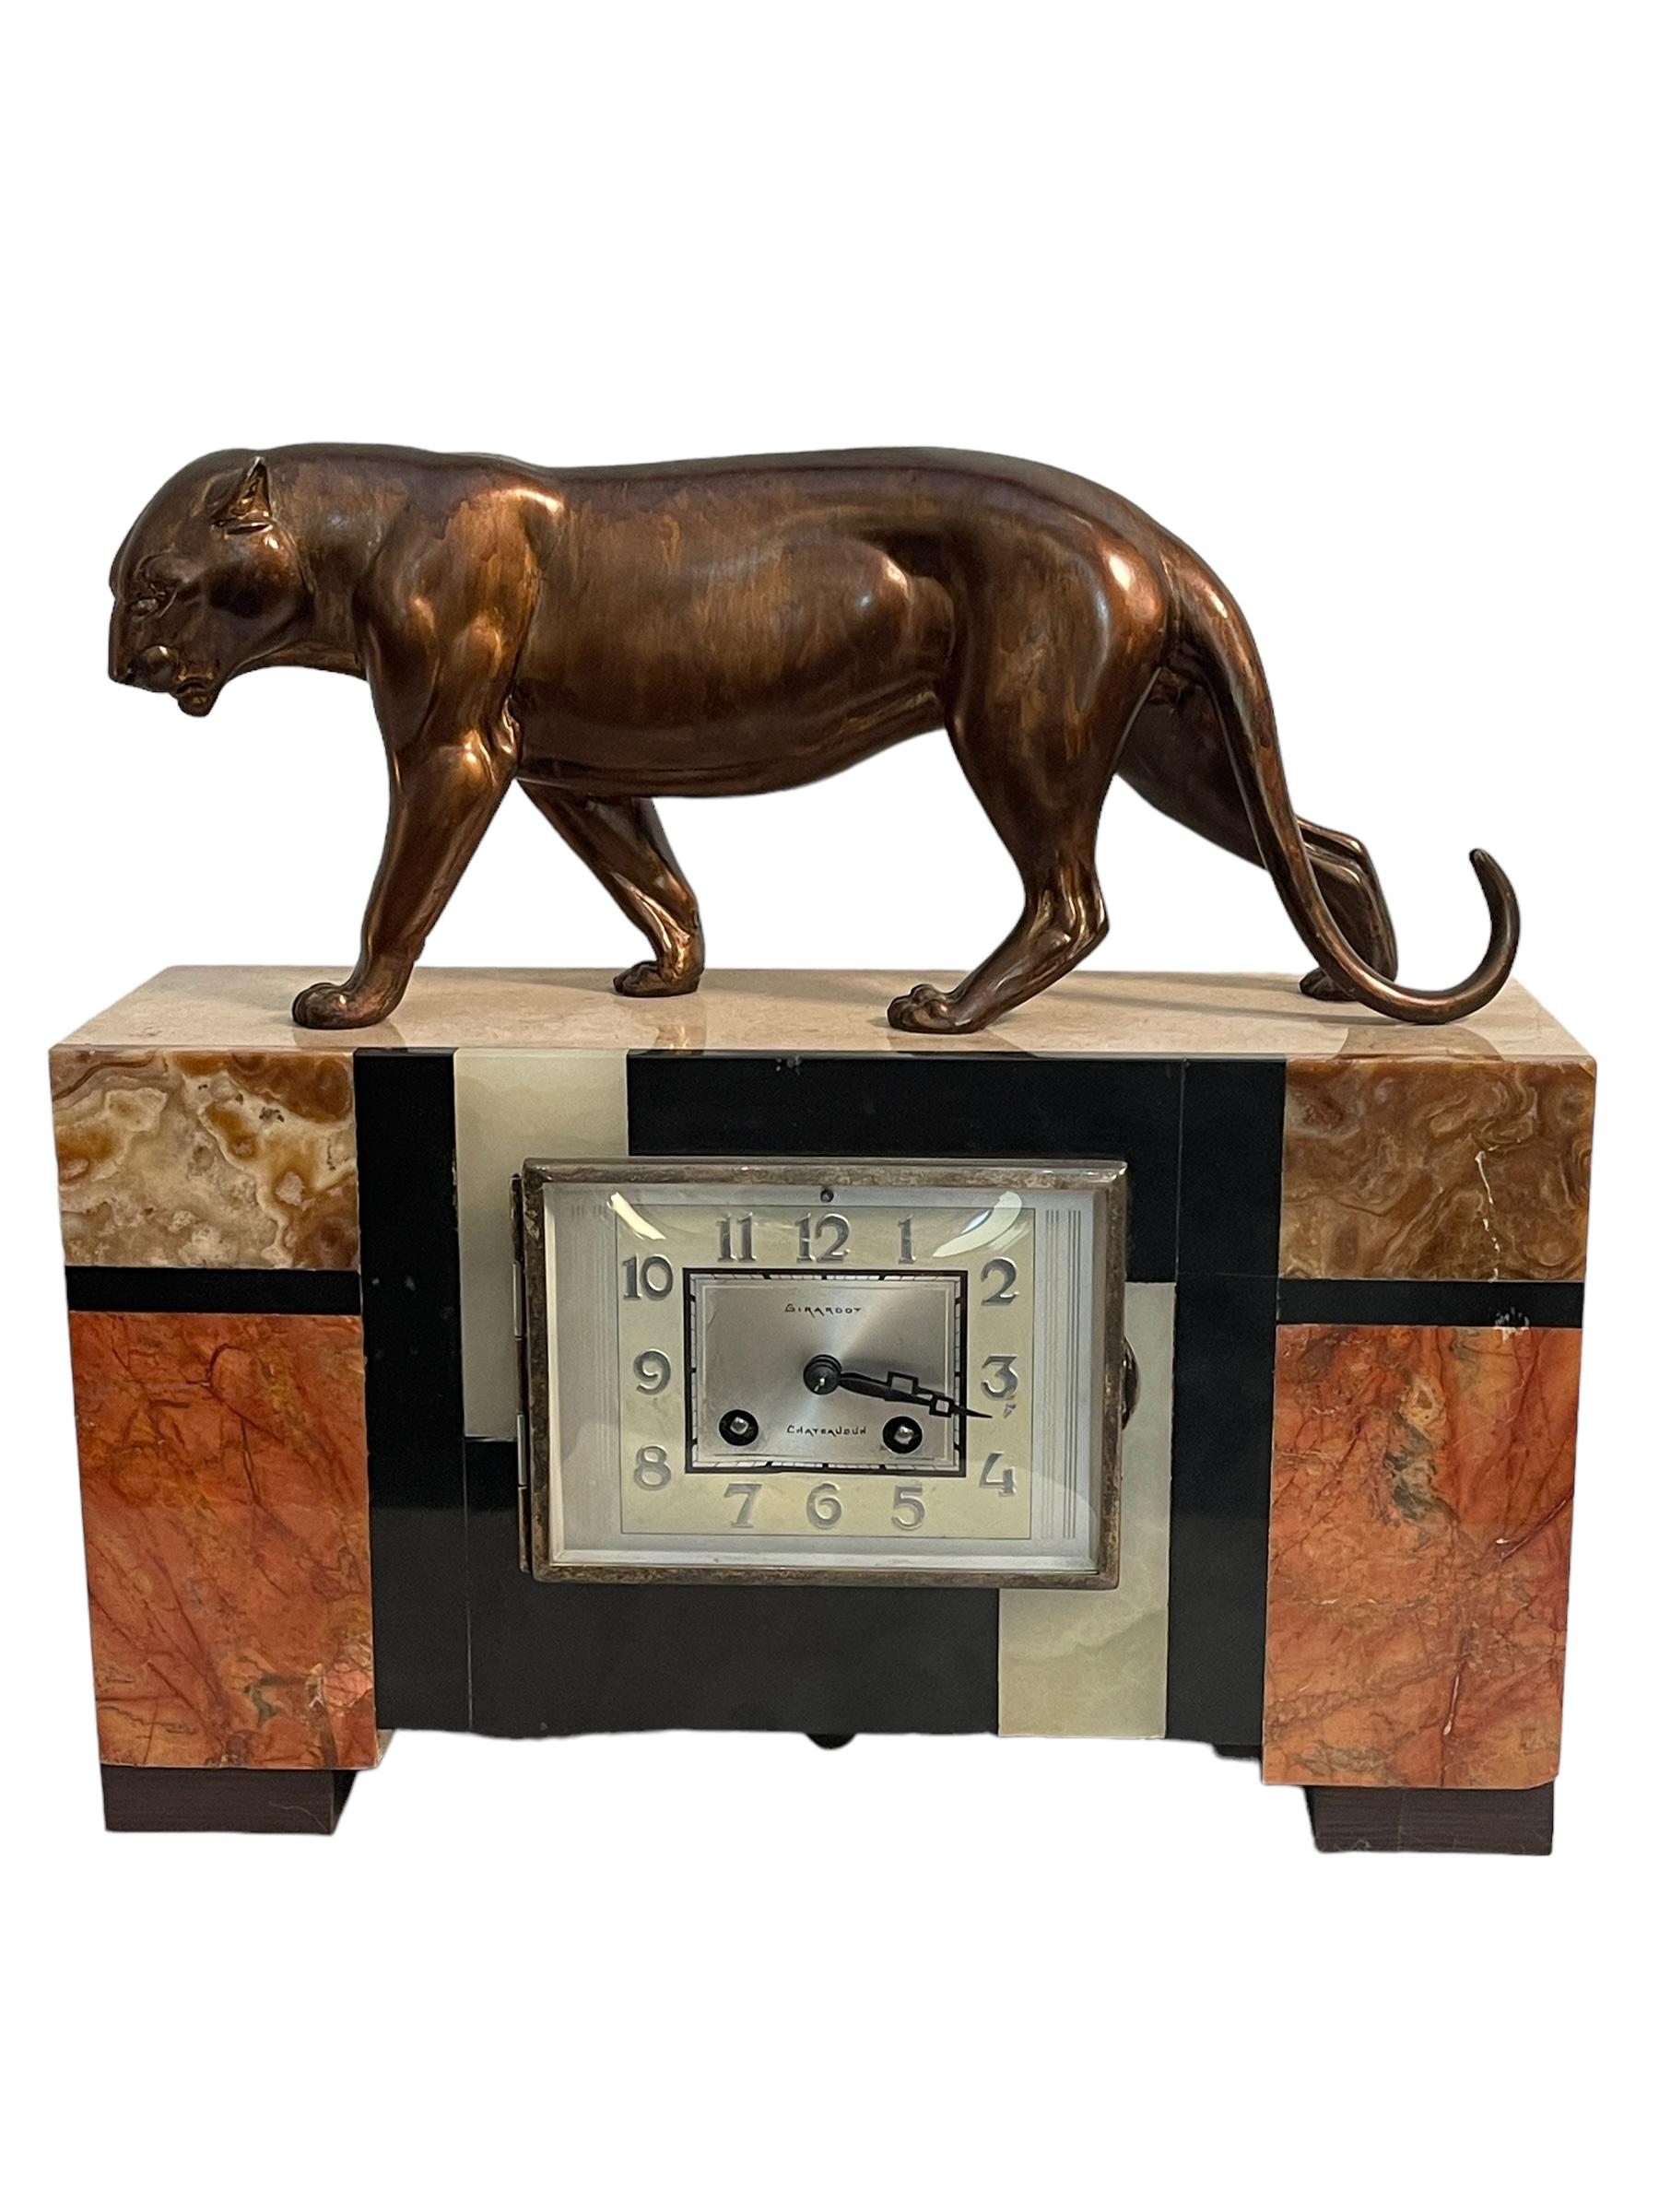 Hand-Crafted Table clock, French Art Deco, Panther